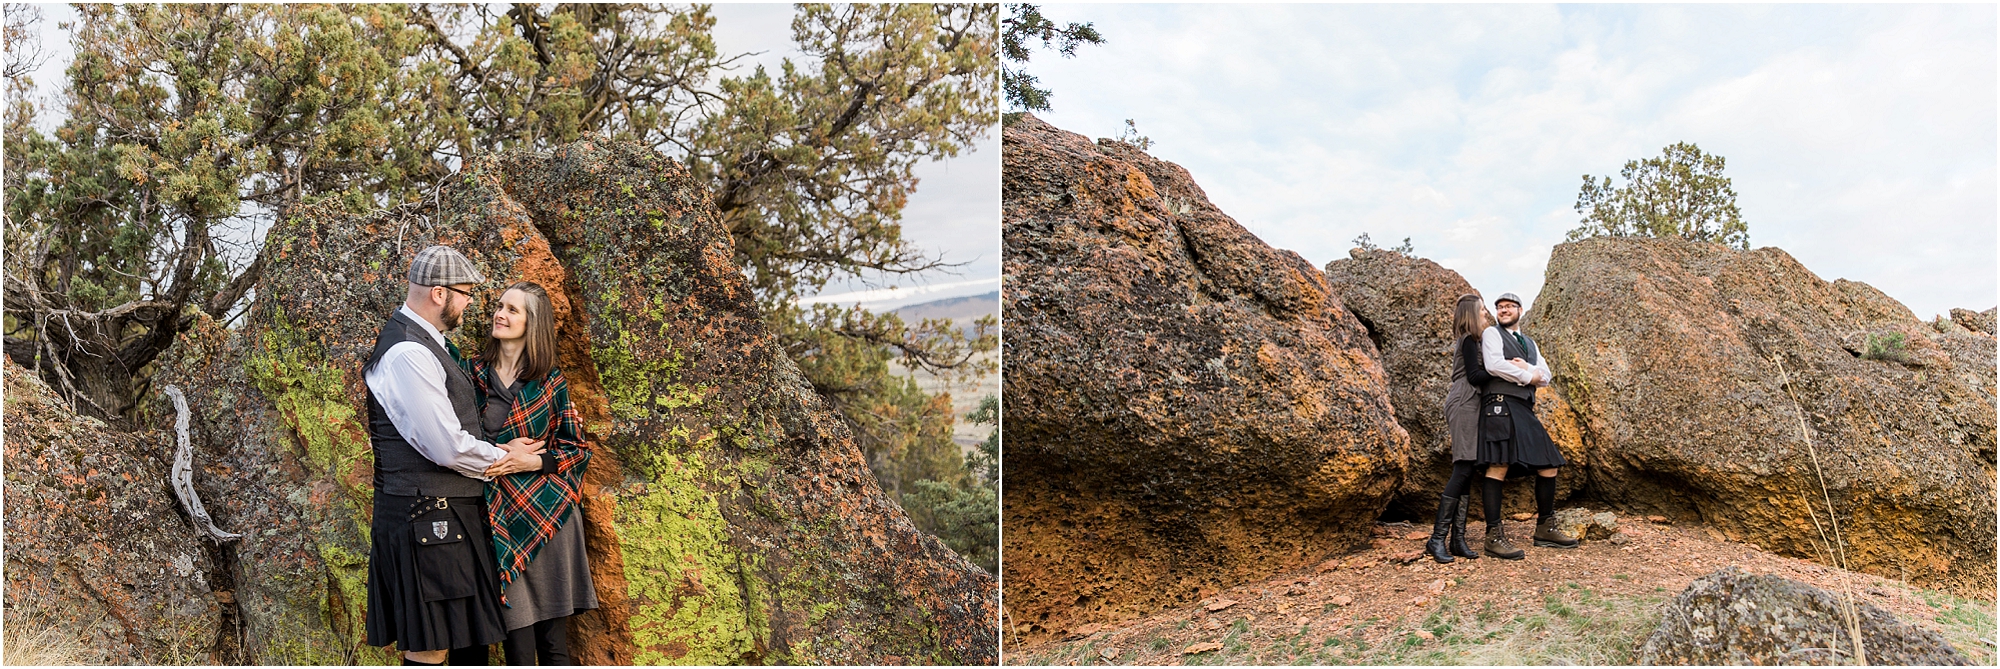 Mossy mustard colored lichen grow on amazing volcanic rocks in the high desert of Oregon, a perfect backdrop for a gorgeous spring engagement photo session near Bend, Oregon. | Erica Swantek Photography